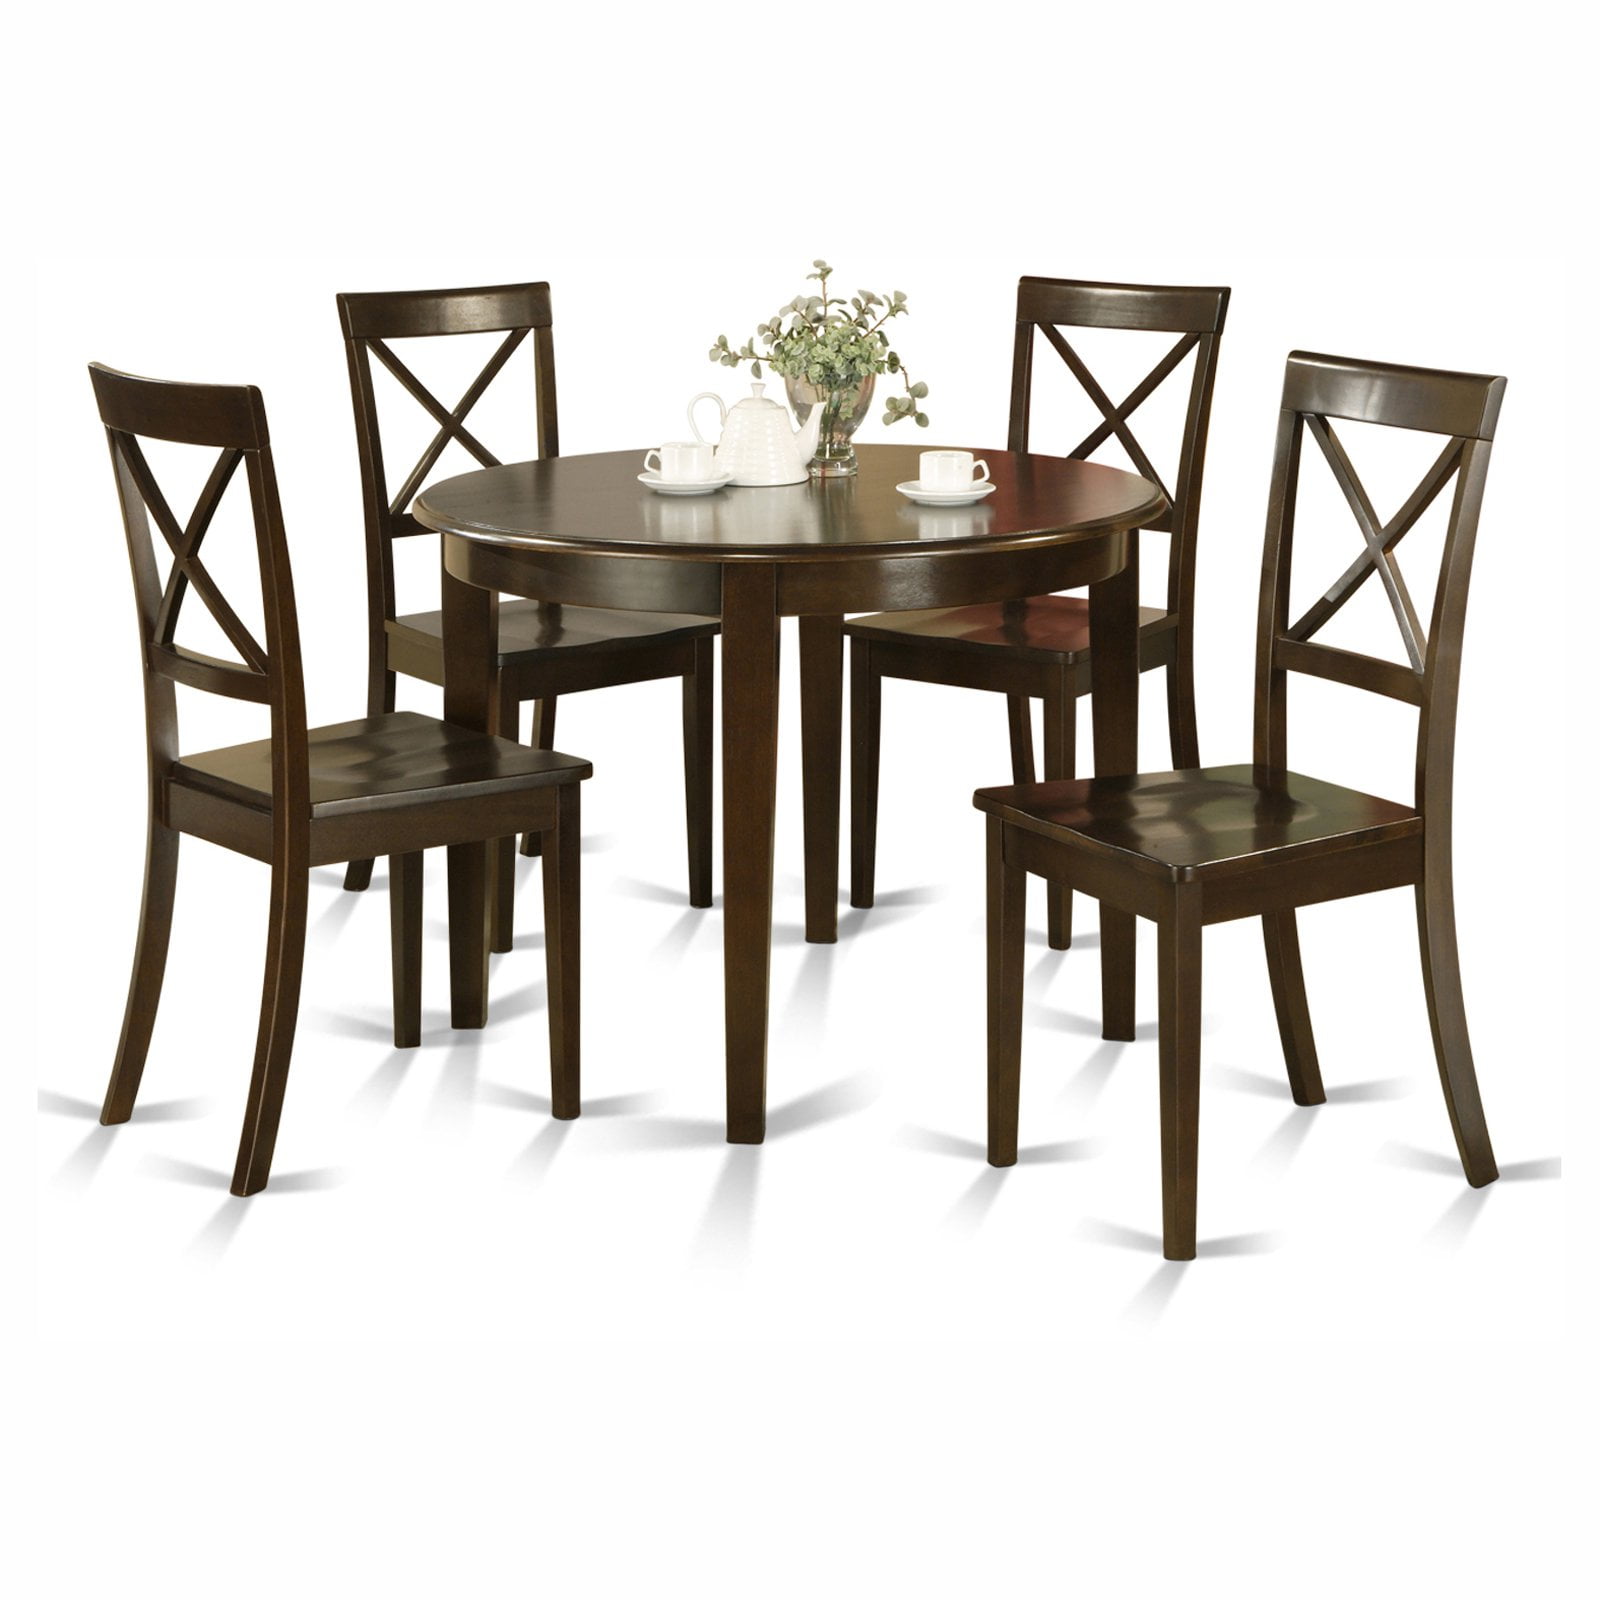 5 Piece Round Dining Table Set, Round Kitchen Table Sets With Leaf